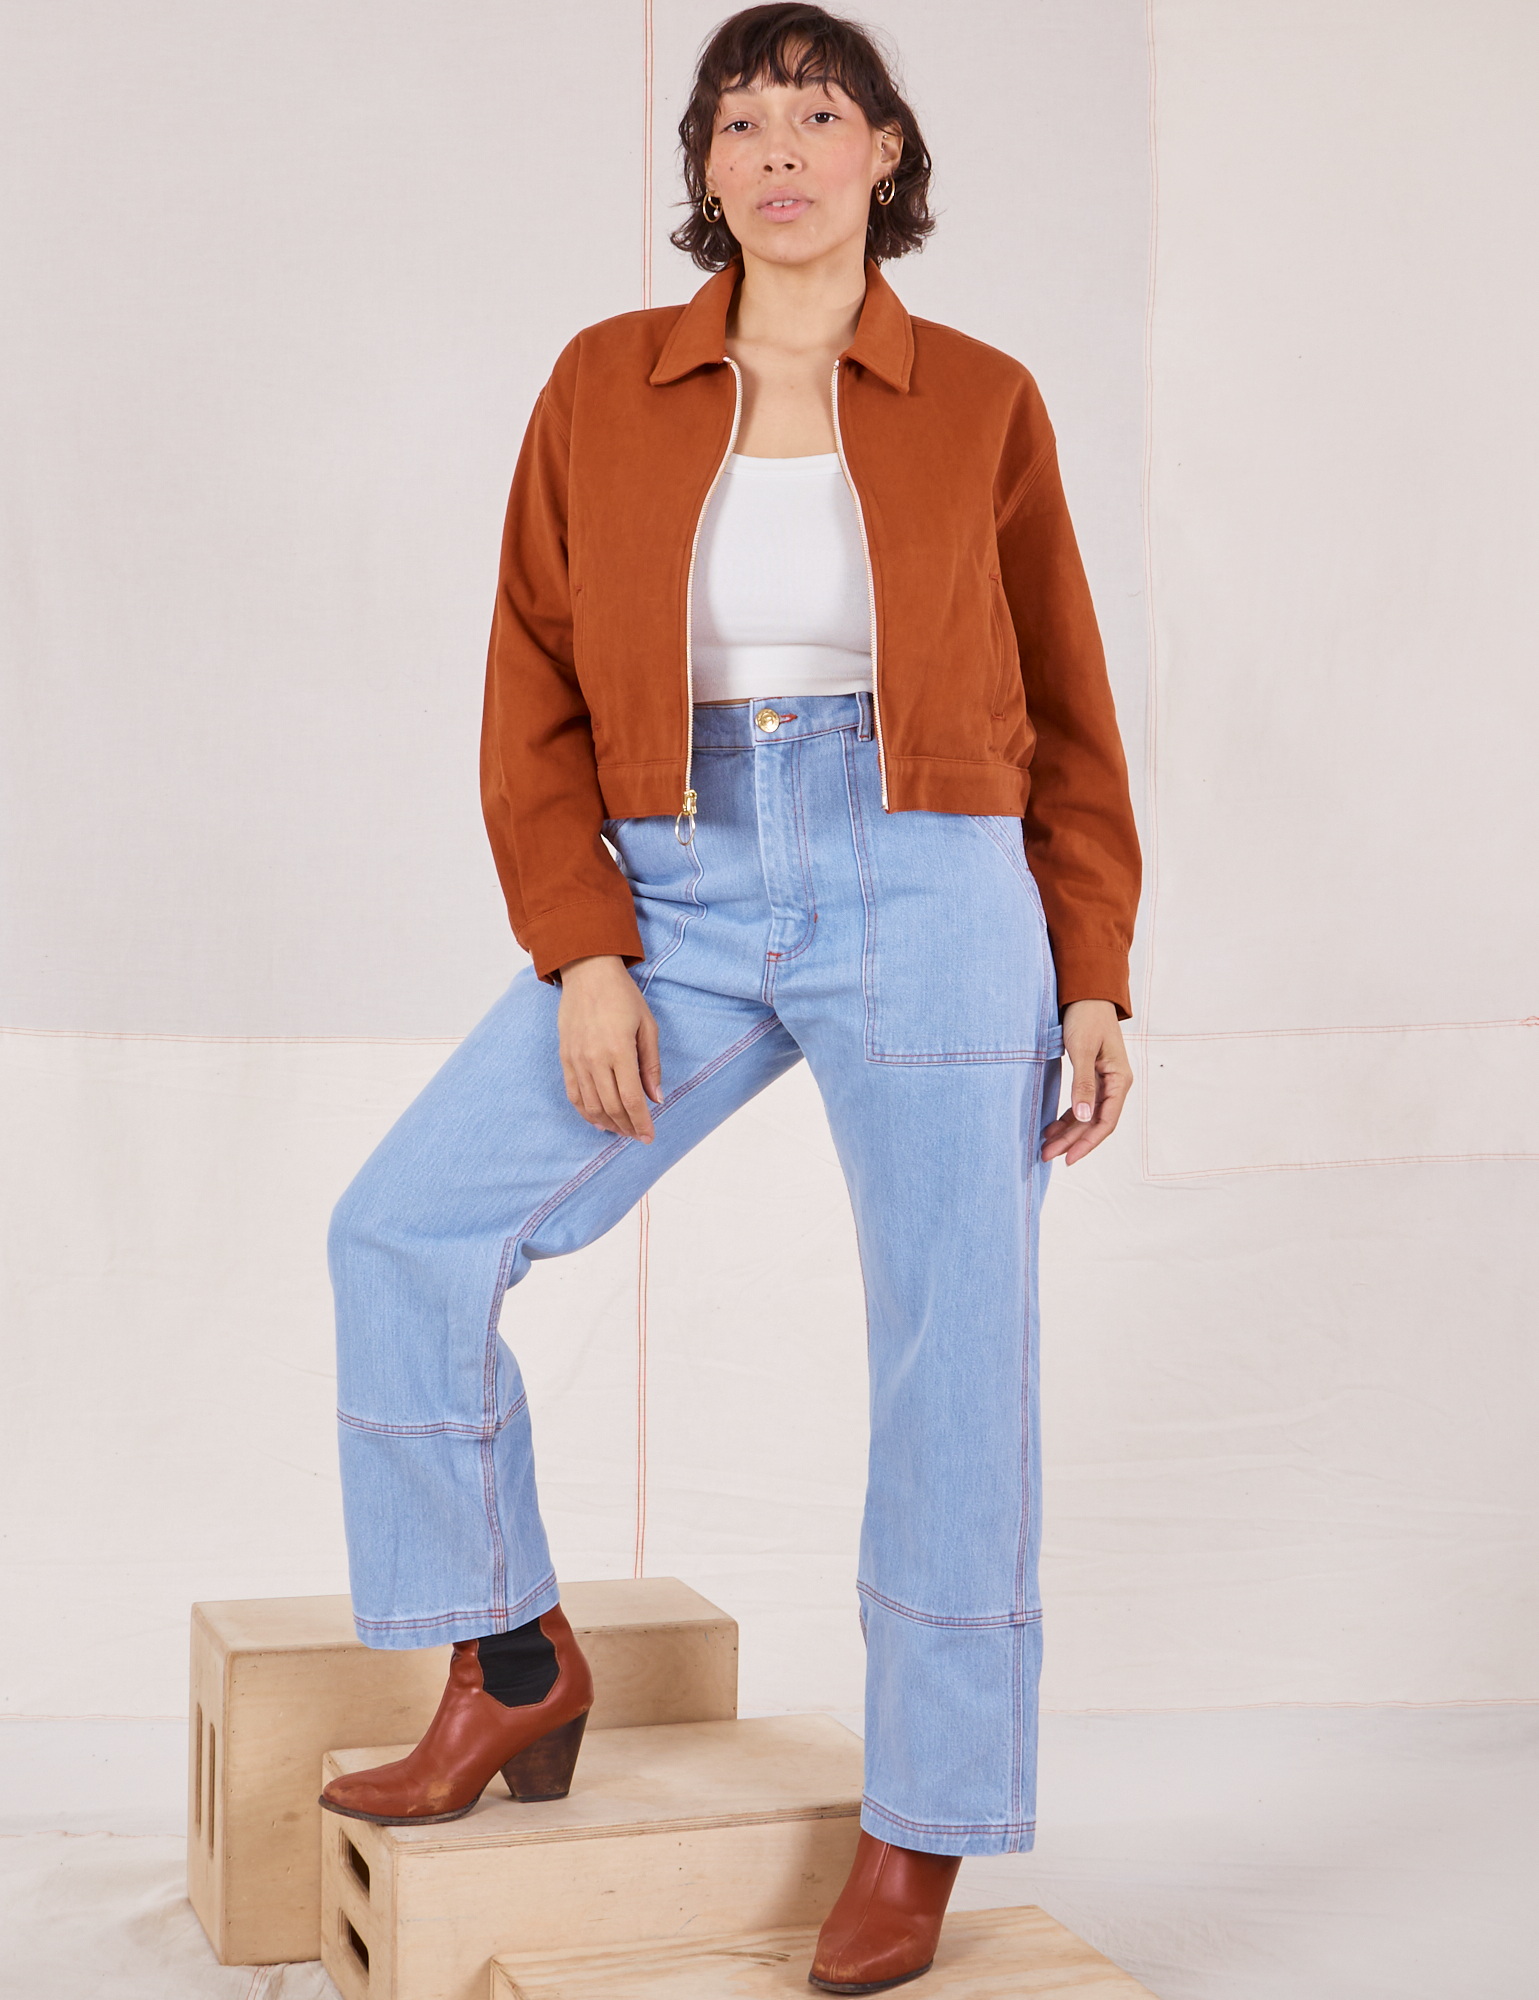 Tiara is wearing Ricky Jacket in Burnt Terracotta with a vintage off-white tee Cami and light wash Carpenter Jeans